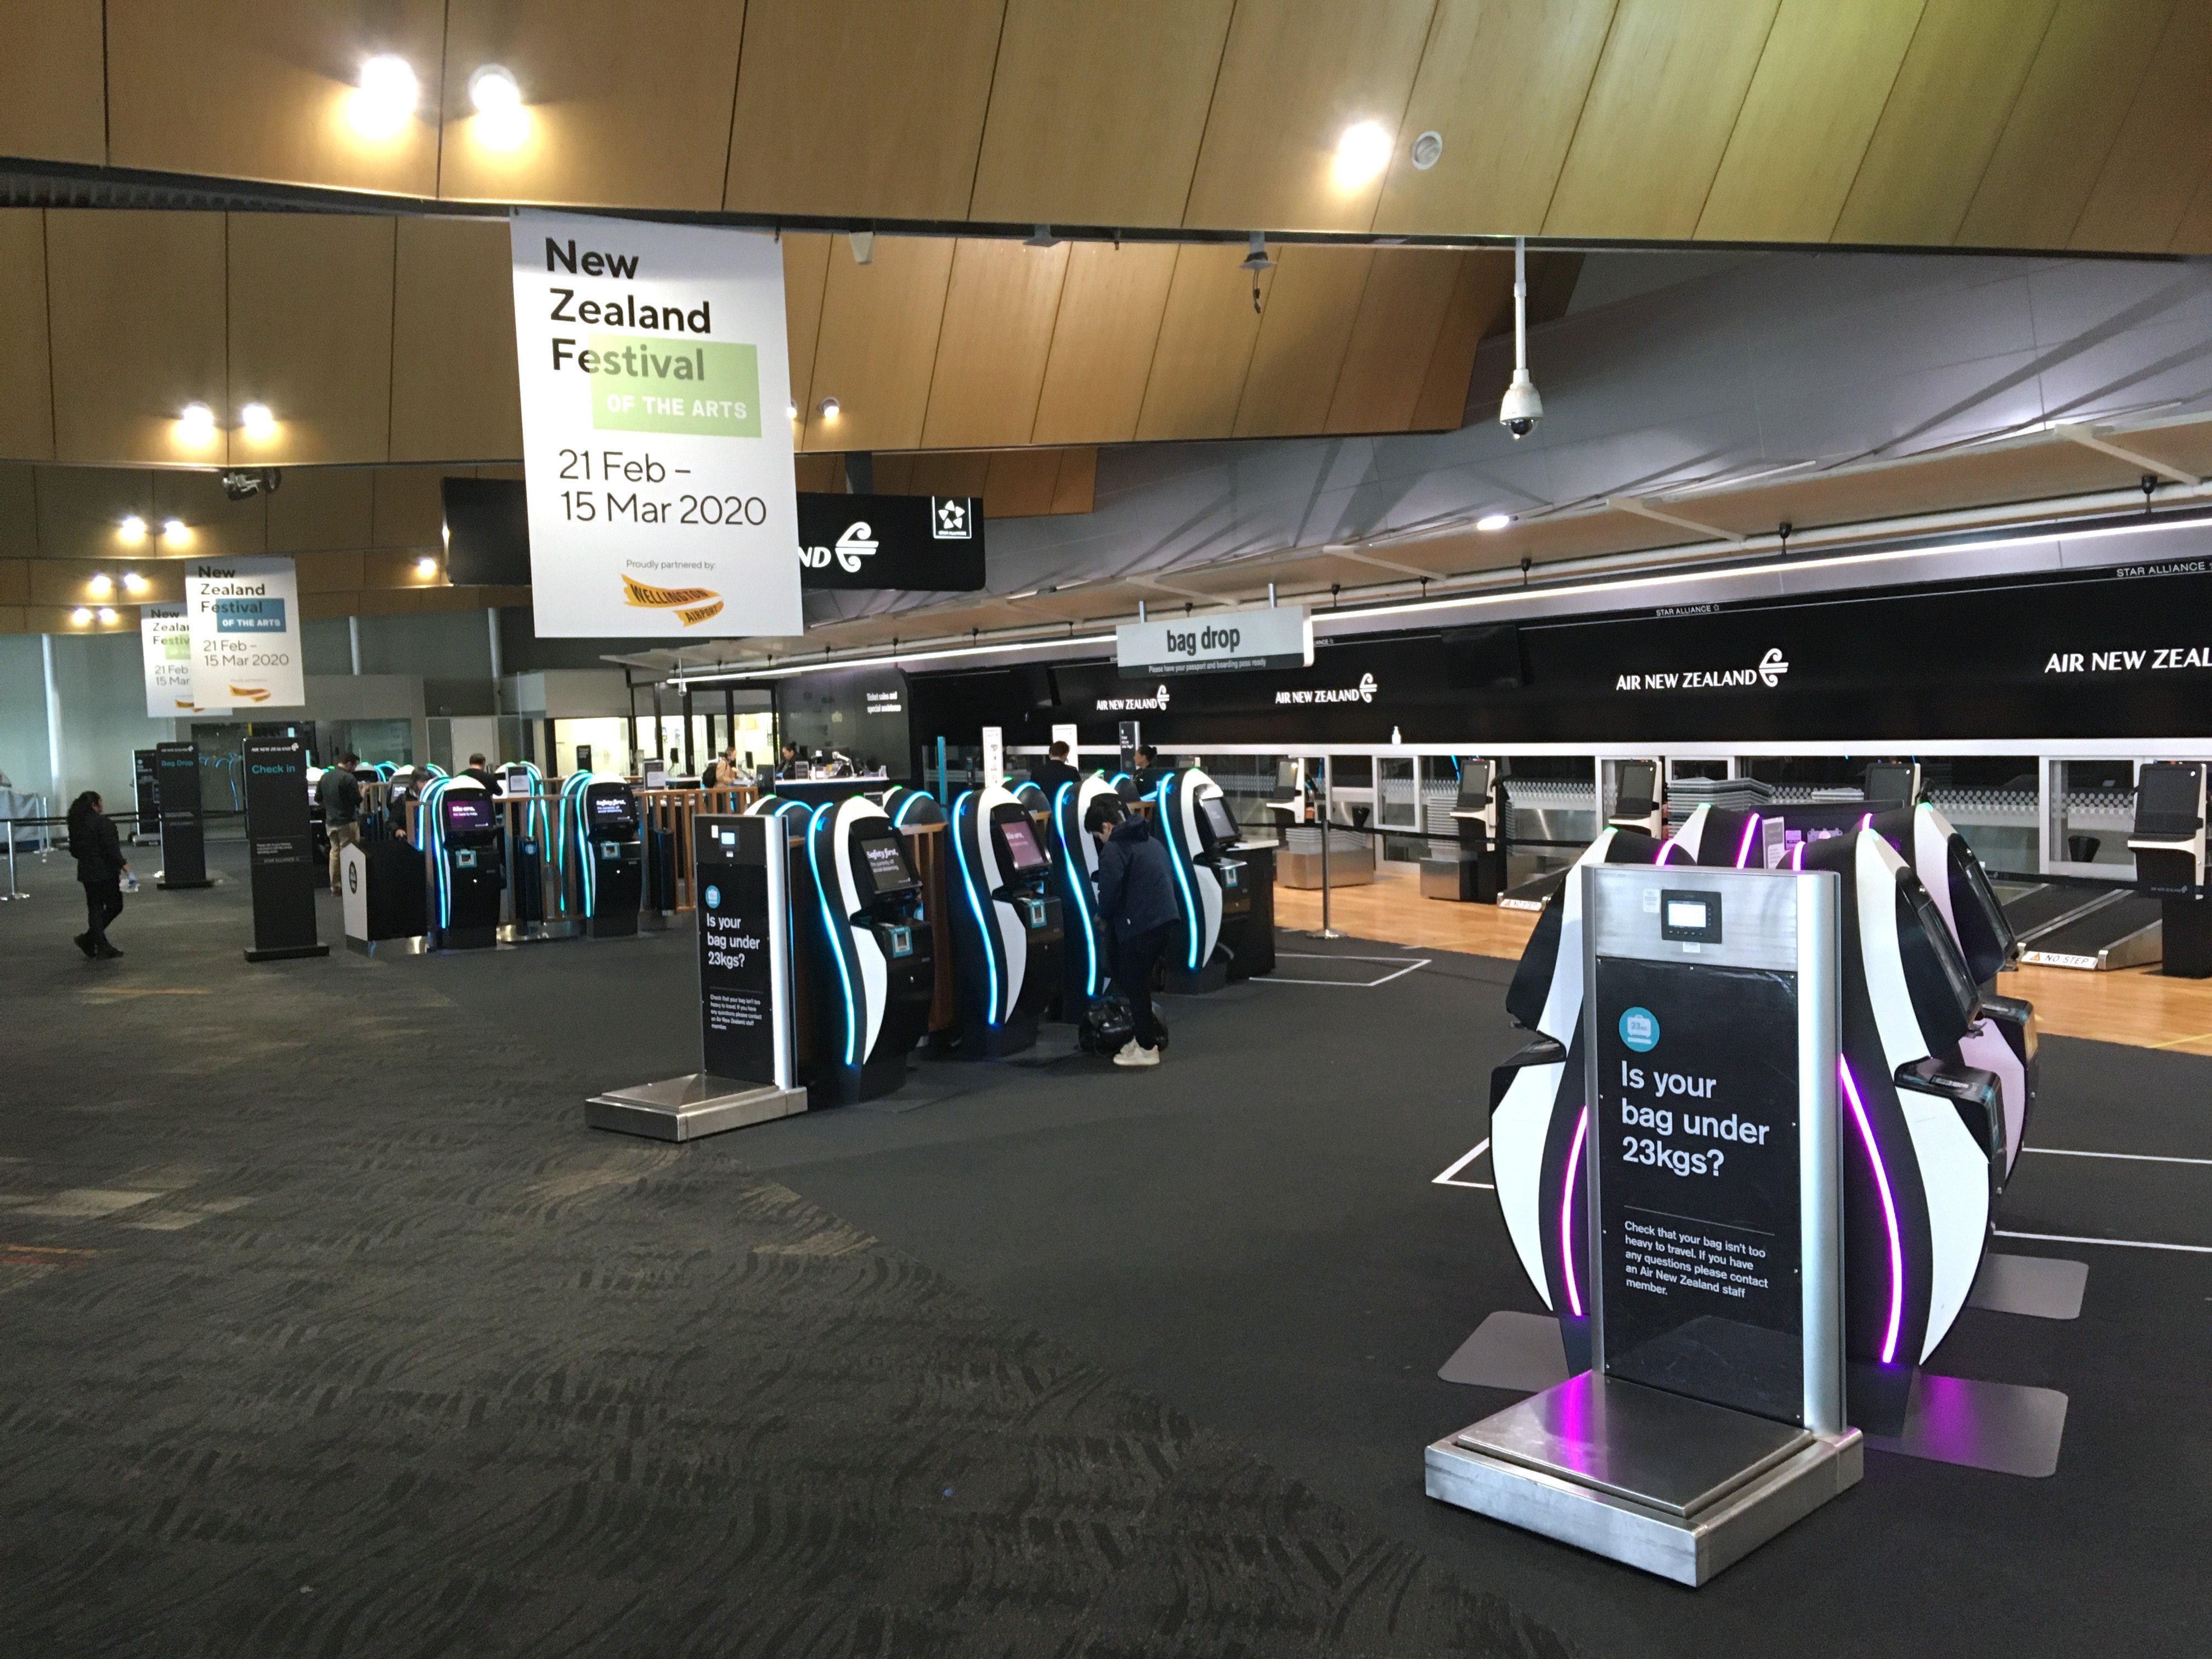 It is decades since New Zealand’s main airports were this quiet at noon.